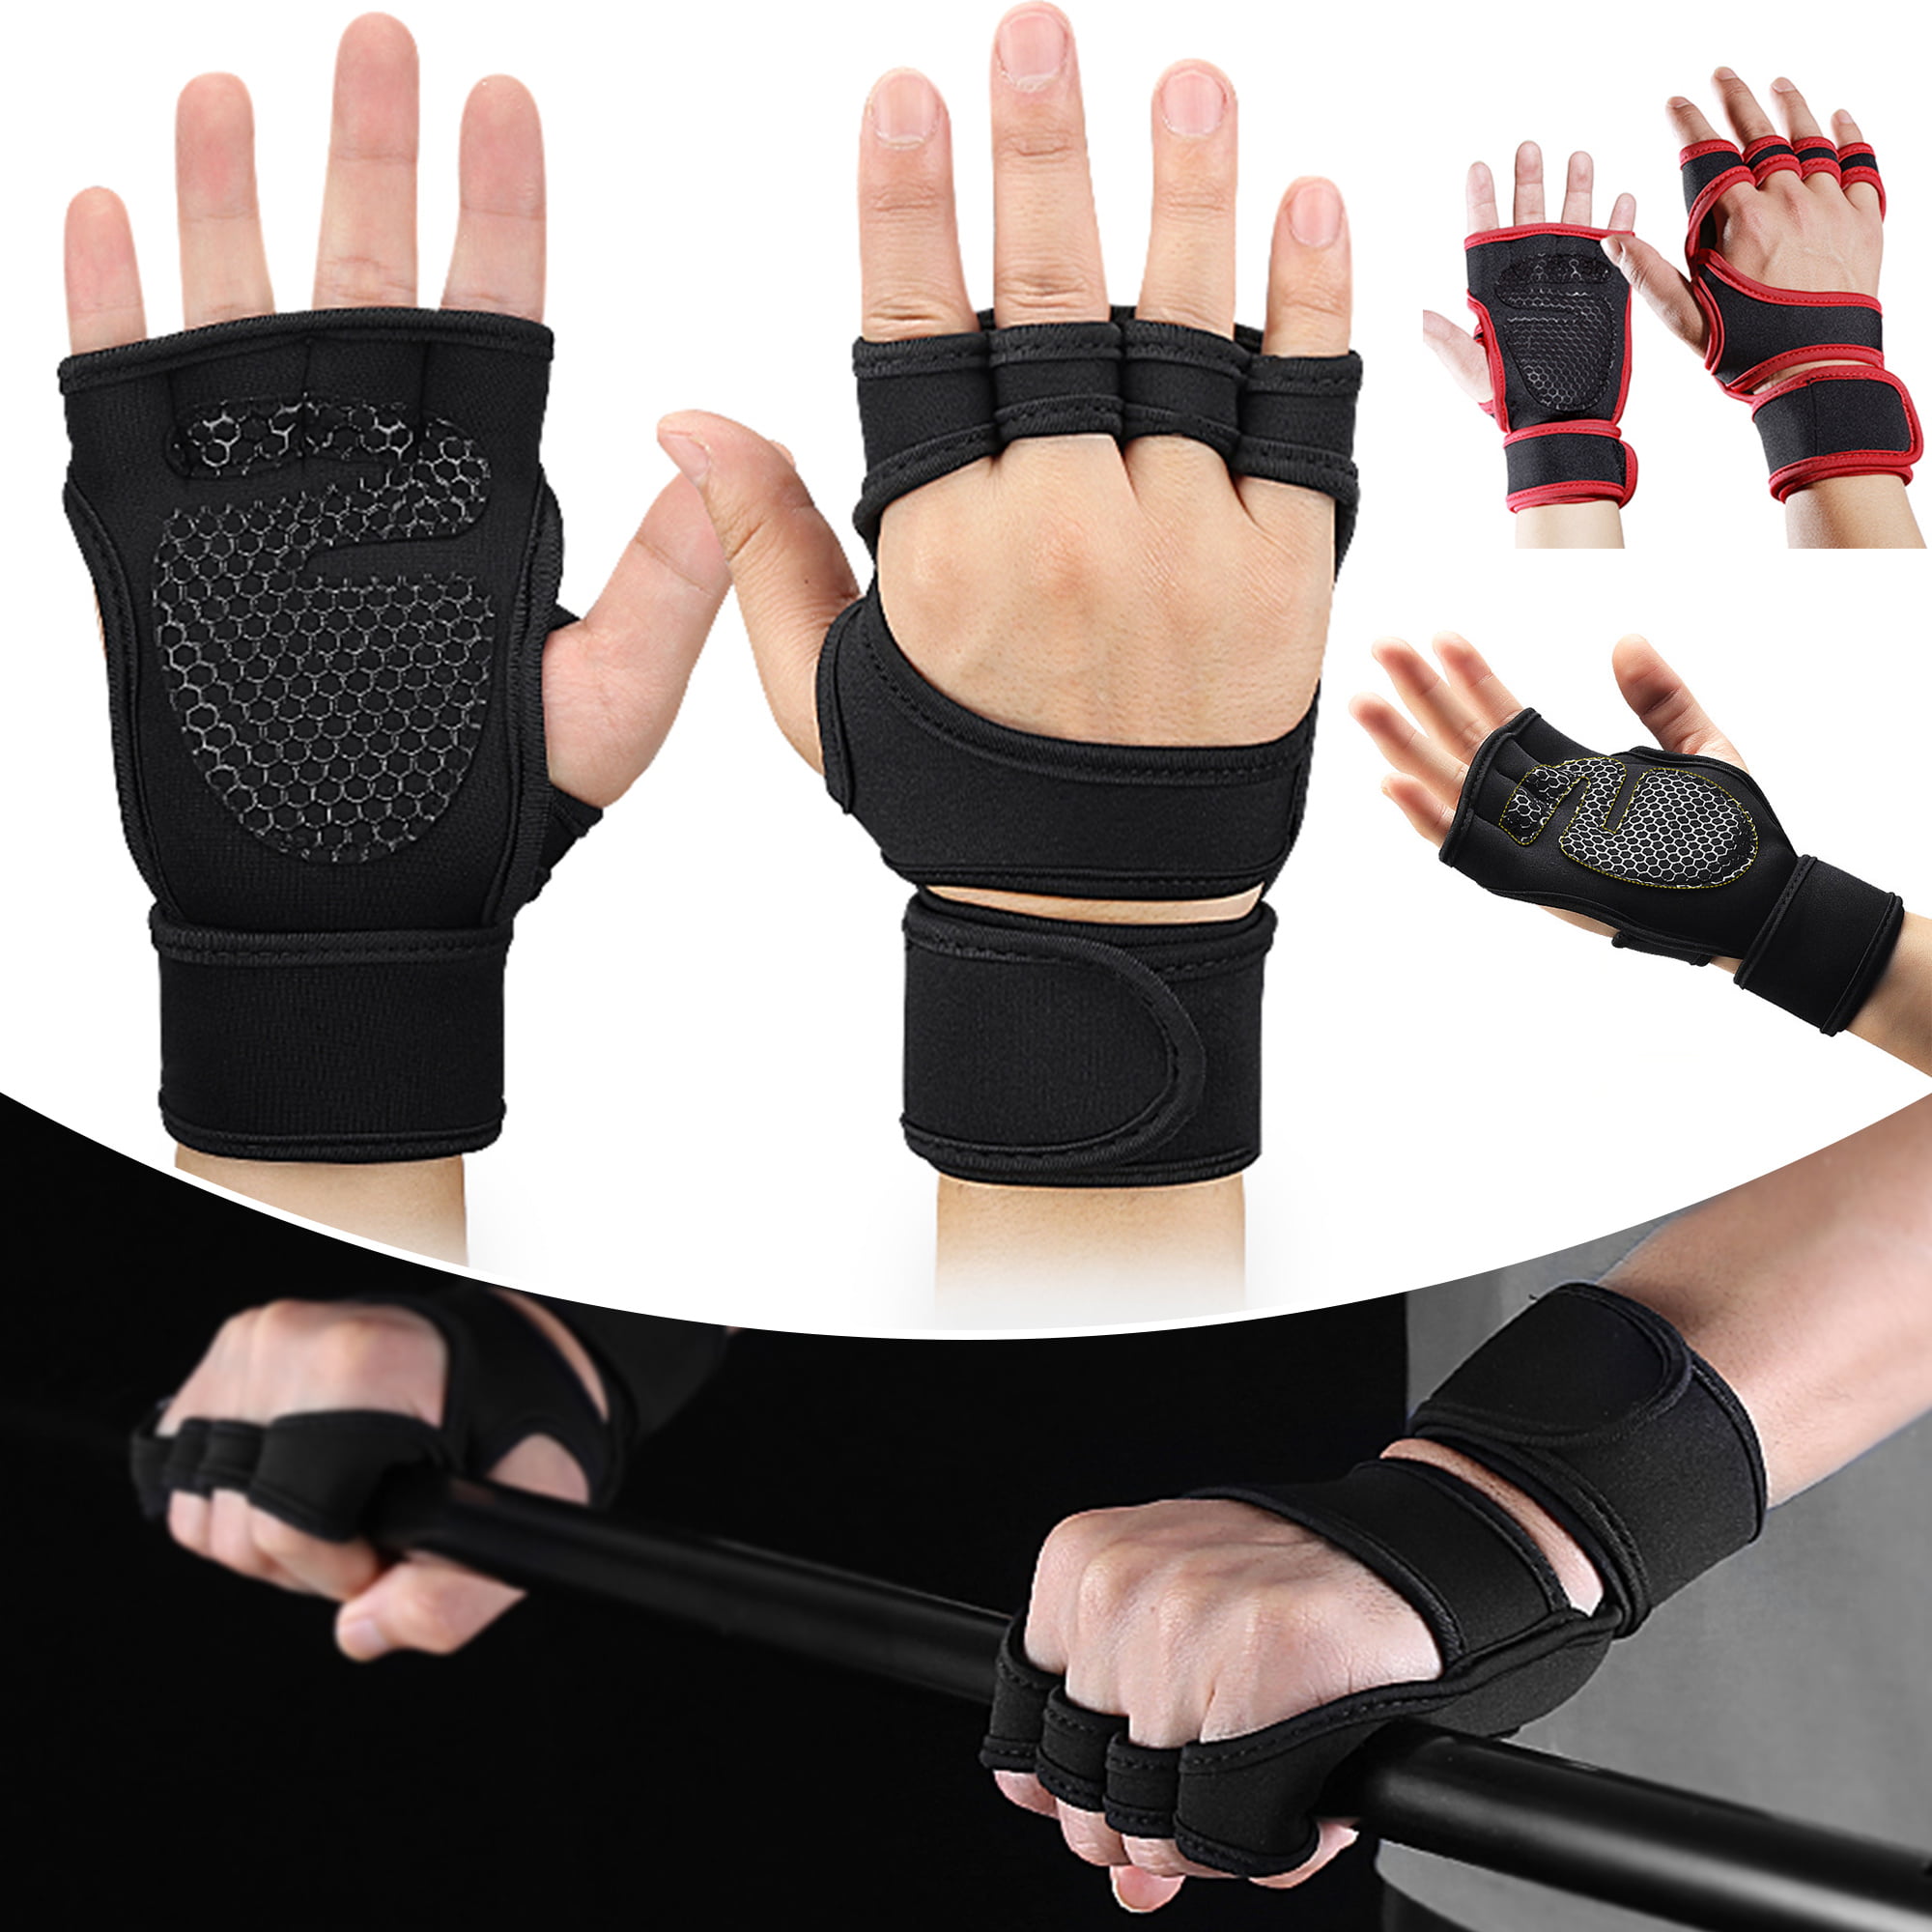 Details about   Gym Weight Lifting Gloves Wrist Support Workout  Straps Fitness Neoprene Black 